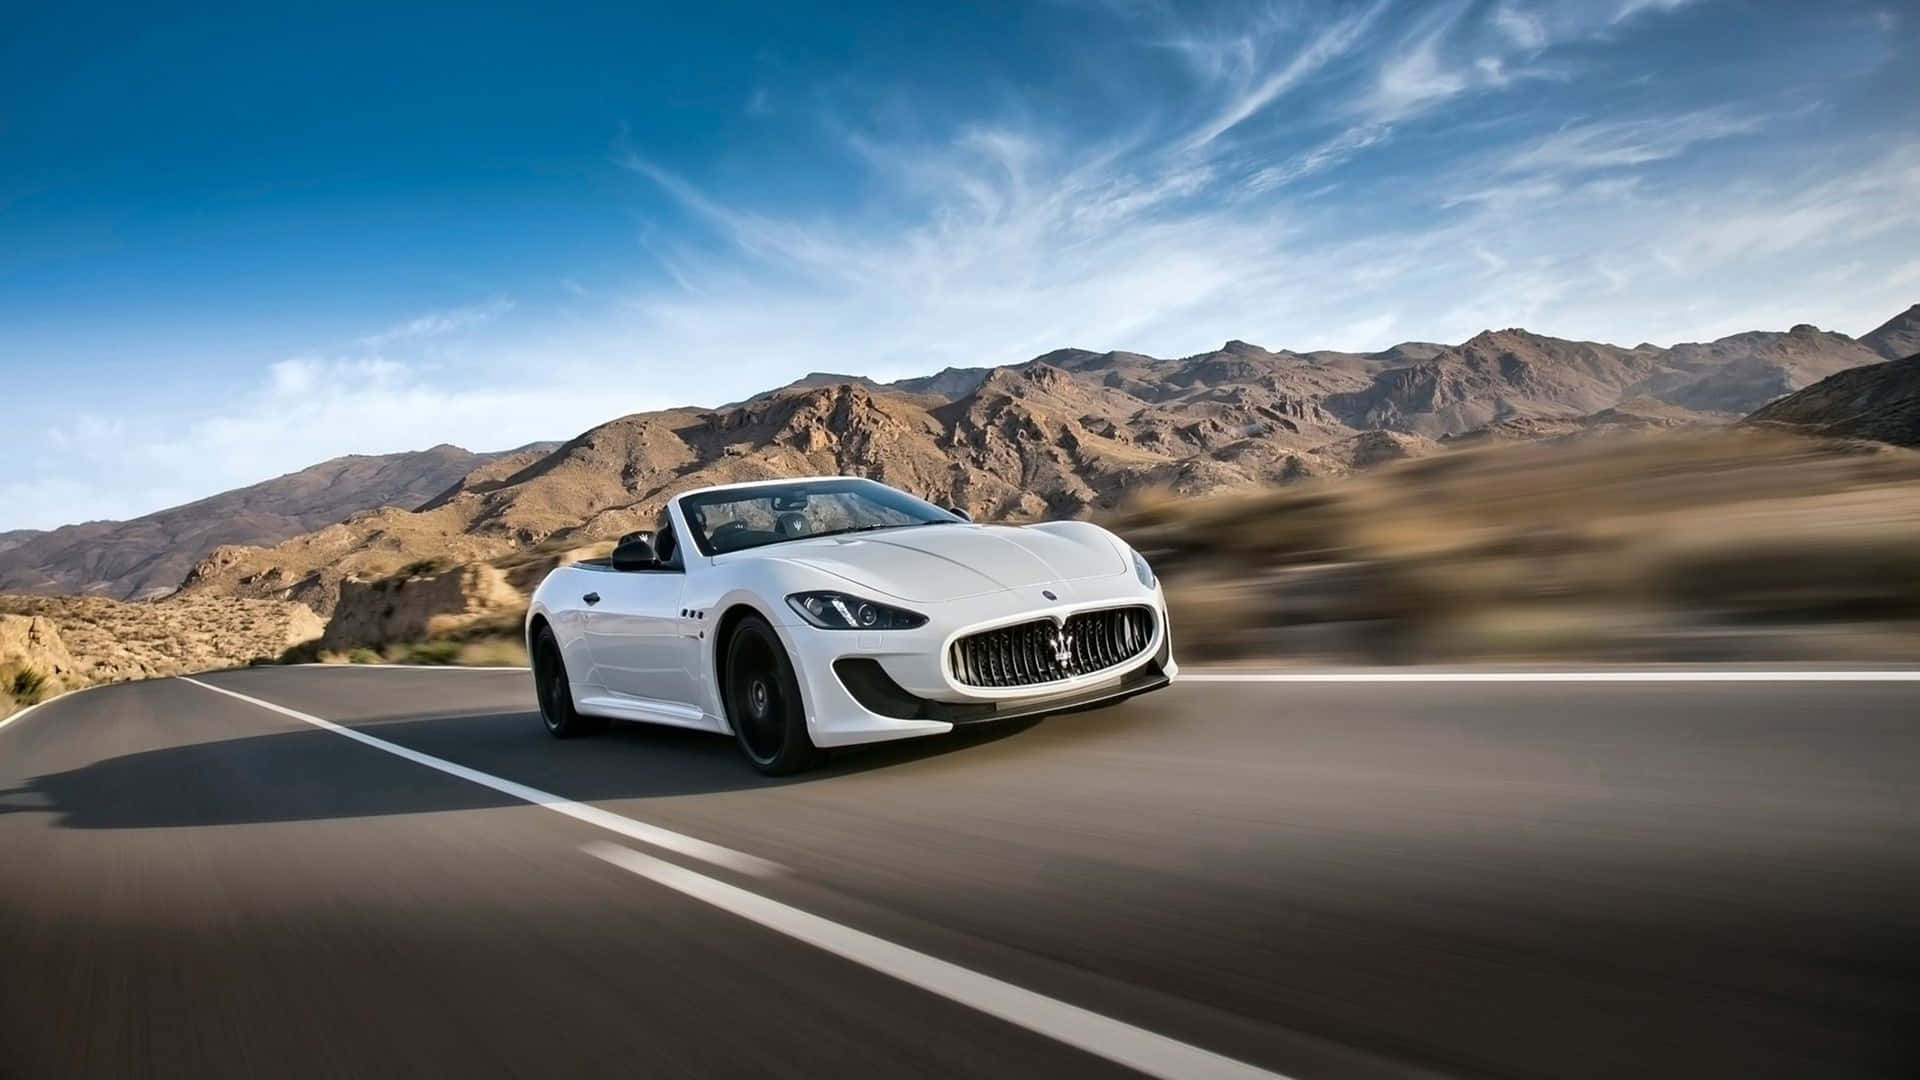 Experience the Power and Excellence of the 4k Maserati Wallpaper